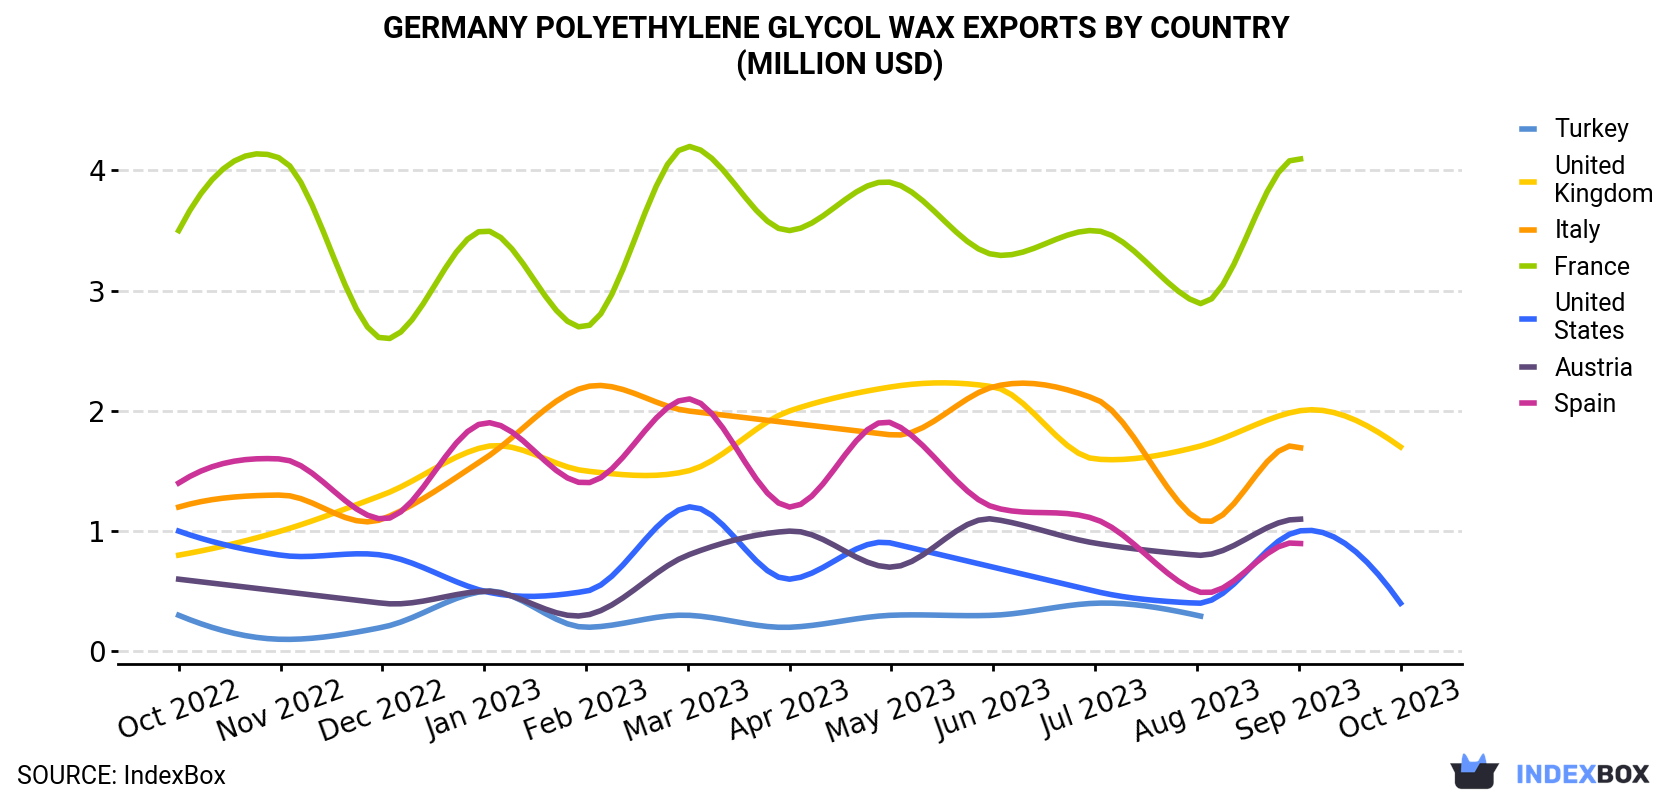 Germany Polyethylene Glycol Wax Exports By Country (Million USD)